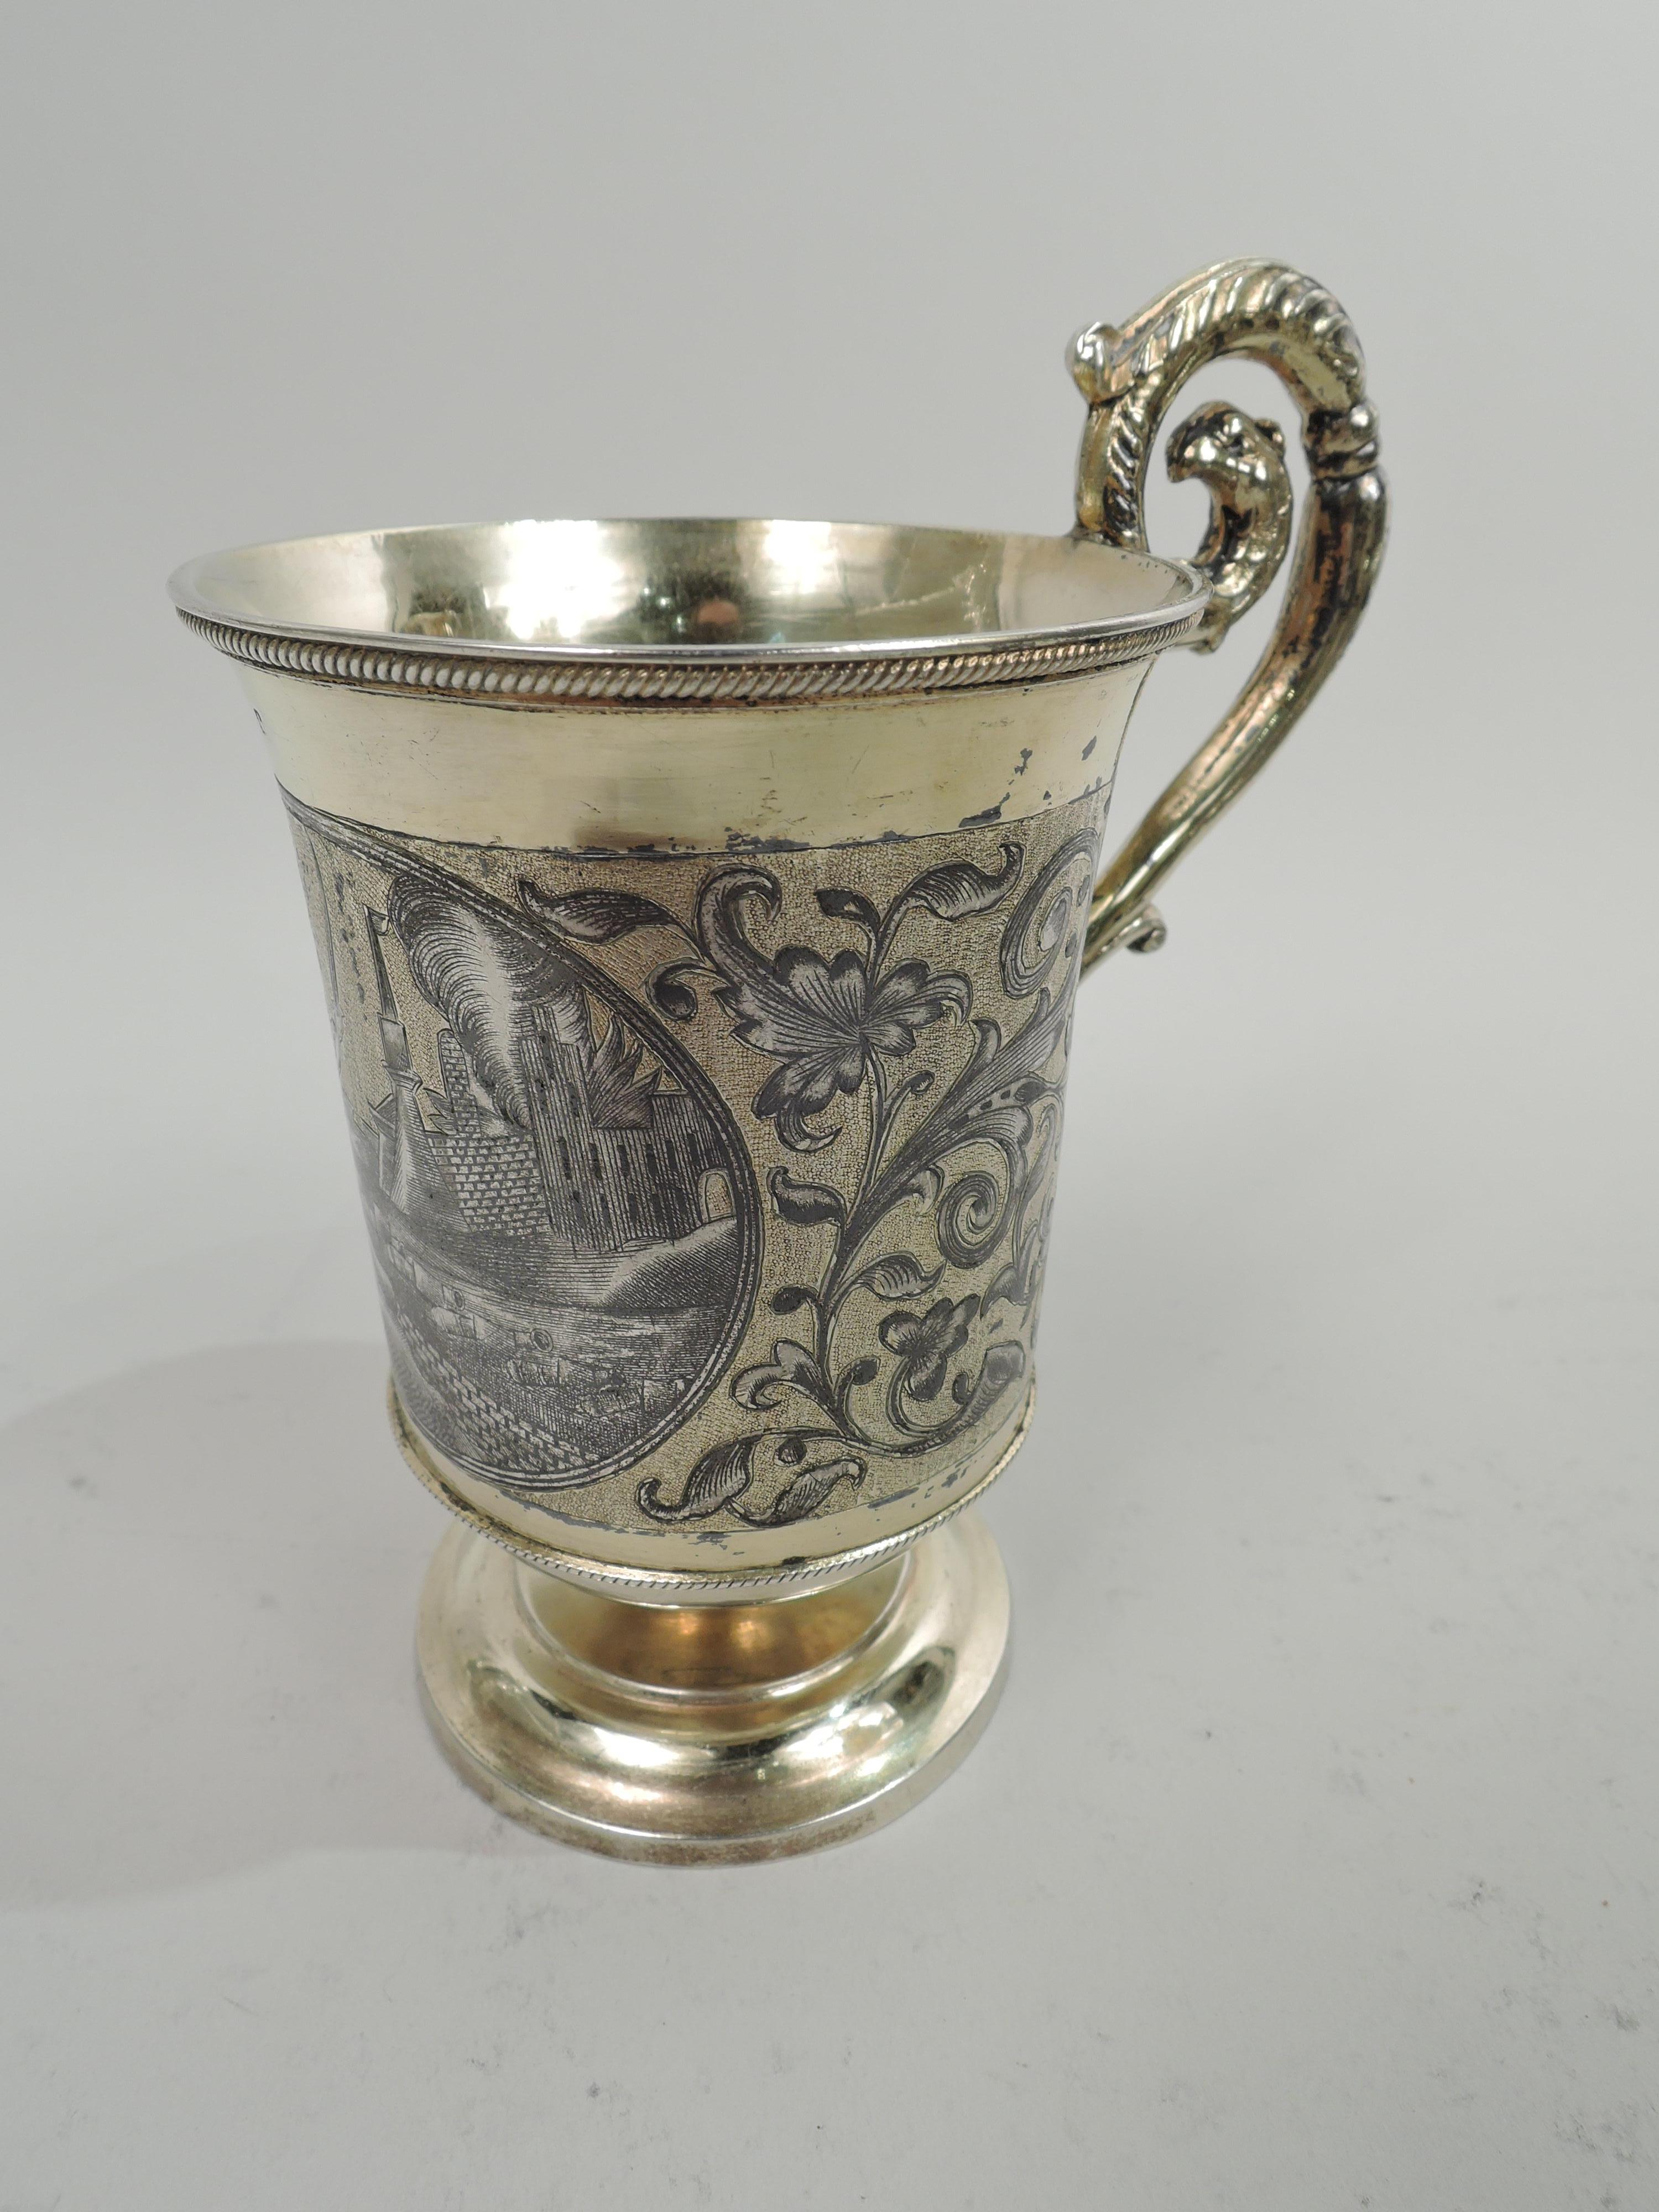 Russian gilt 875 silver christening mug, ca 1880. Bowl has flared rim, curved inset bottom, and gadrooned borders. Niello ornament with leafing and flowering scrollwork; in round frame, a scene from the Napoleonic Wars with a soldier raising a sword